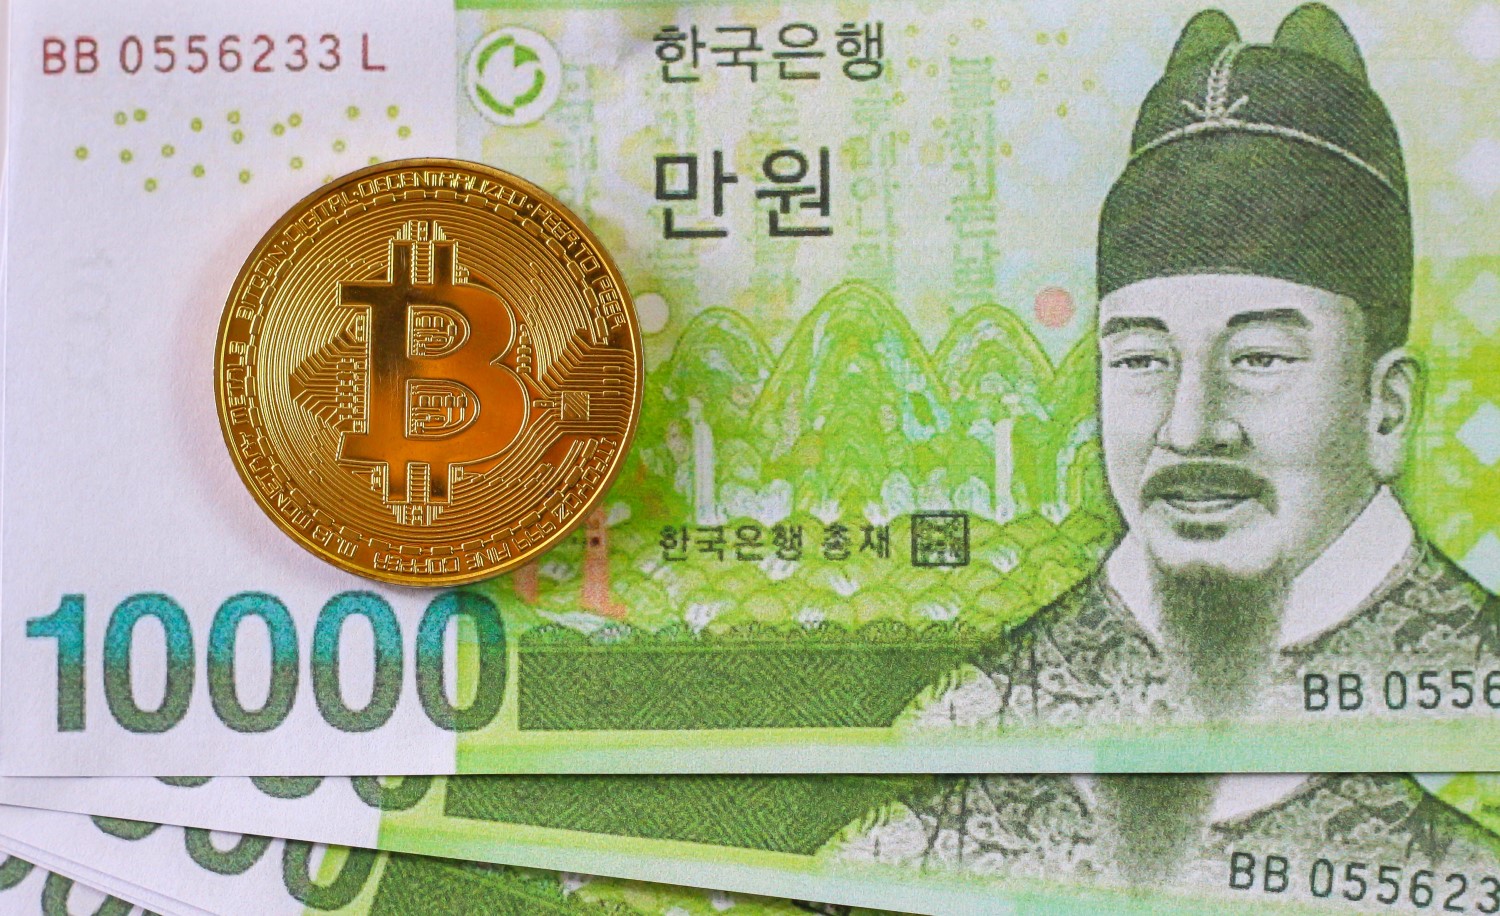 Korea’s Tax Agency To Withhold $70M From Crypto Exchange Bithumb